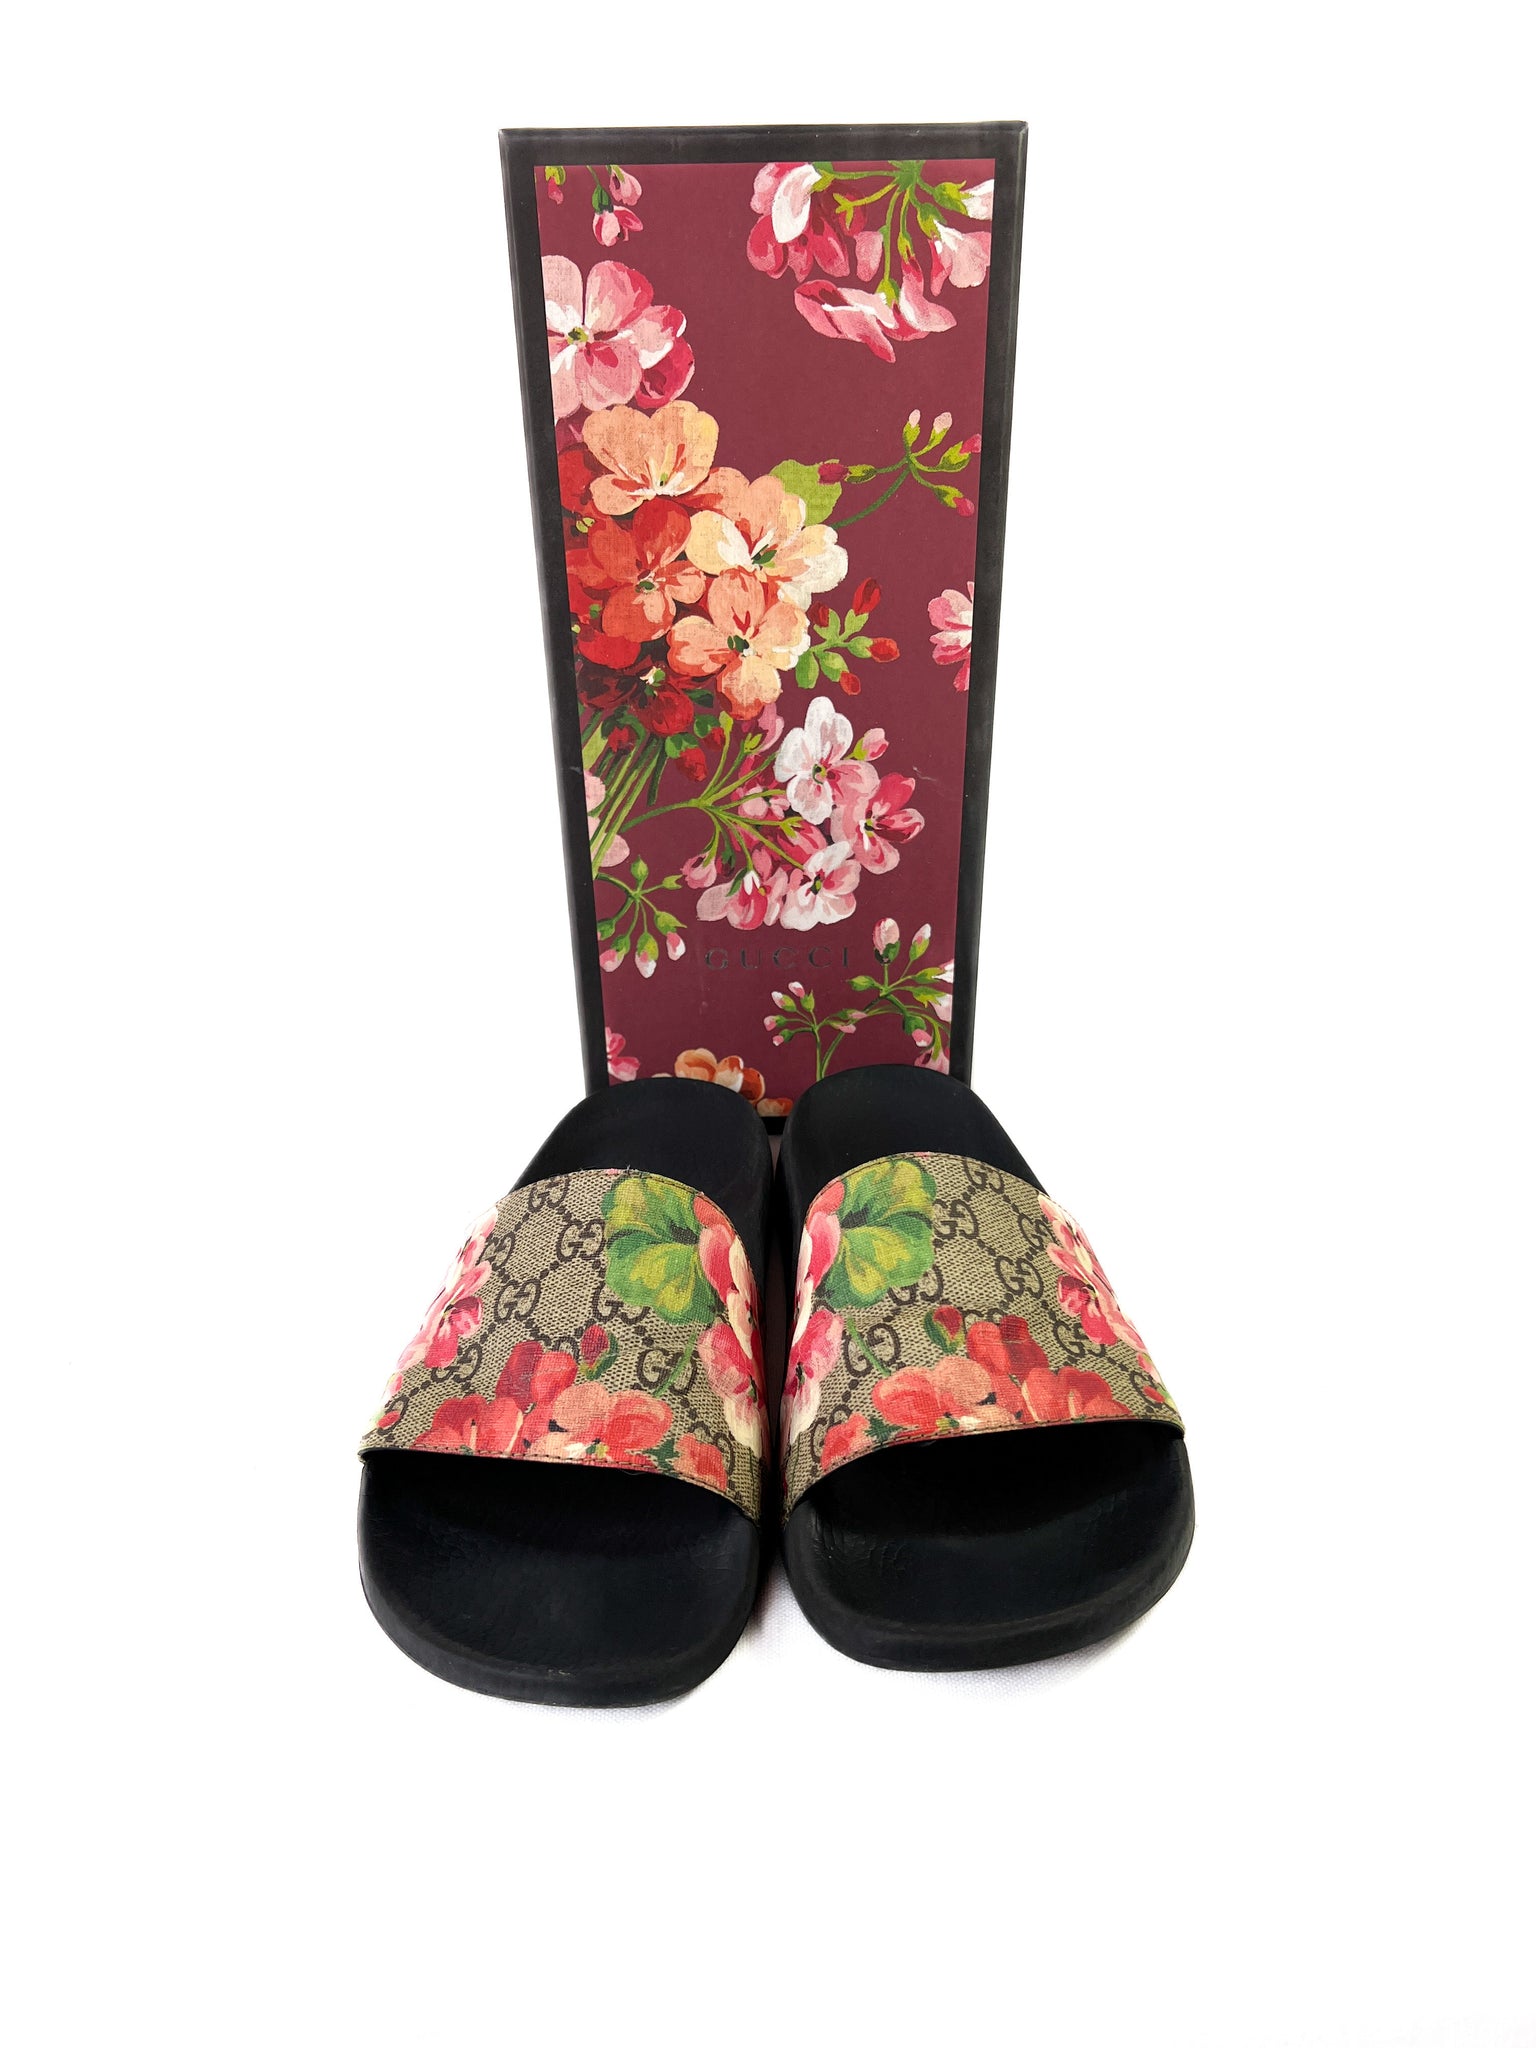 Gucci, Shoes, Real Floral Gucci Slides